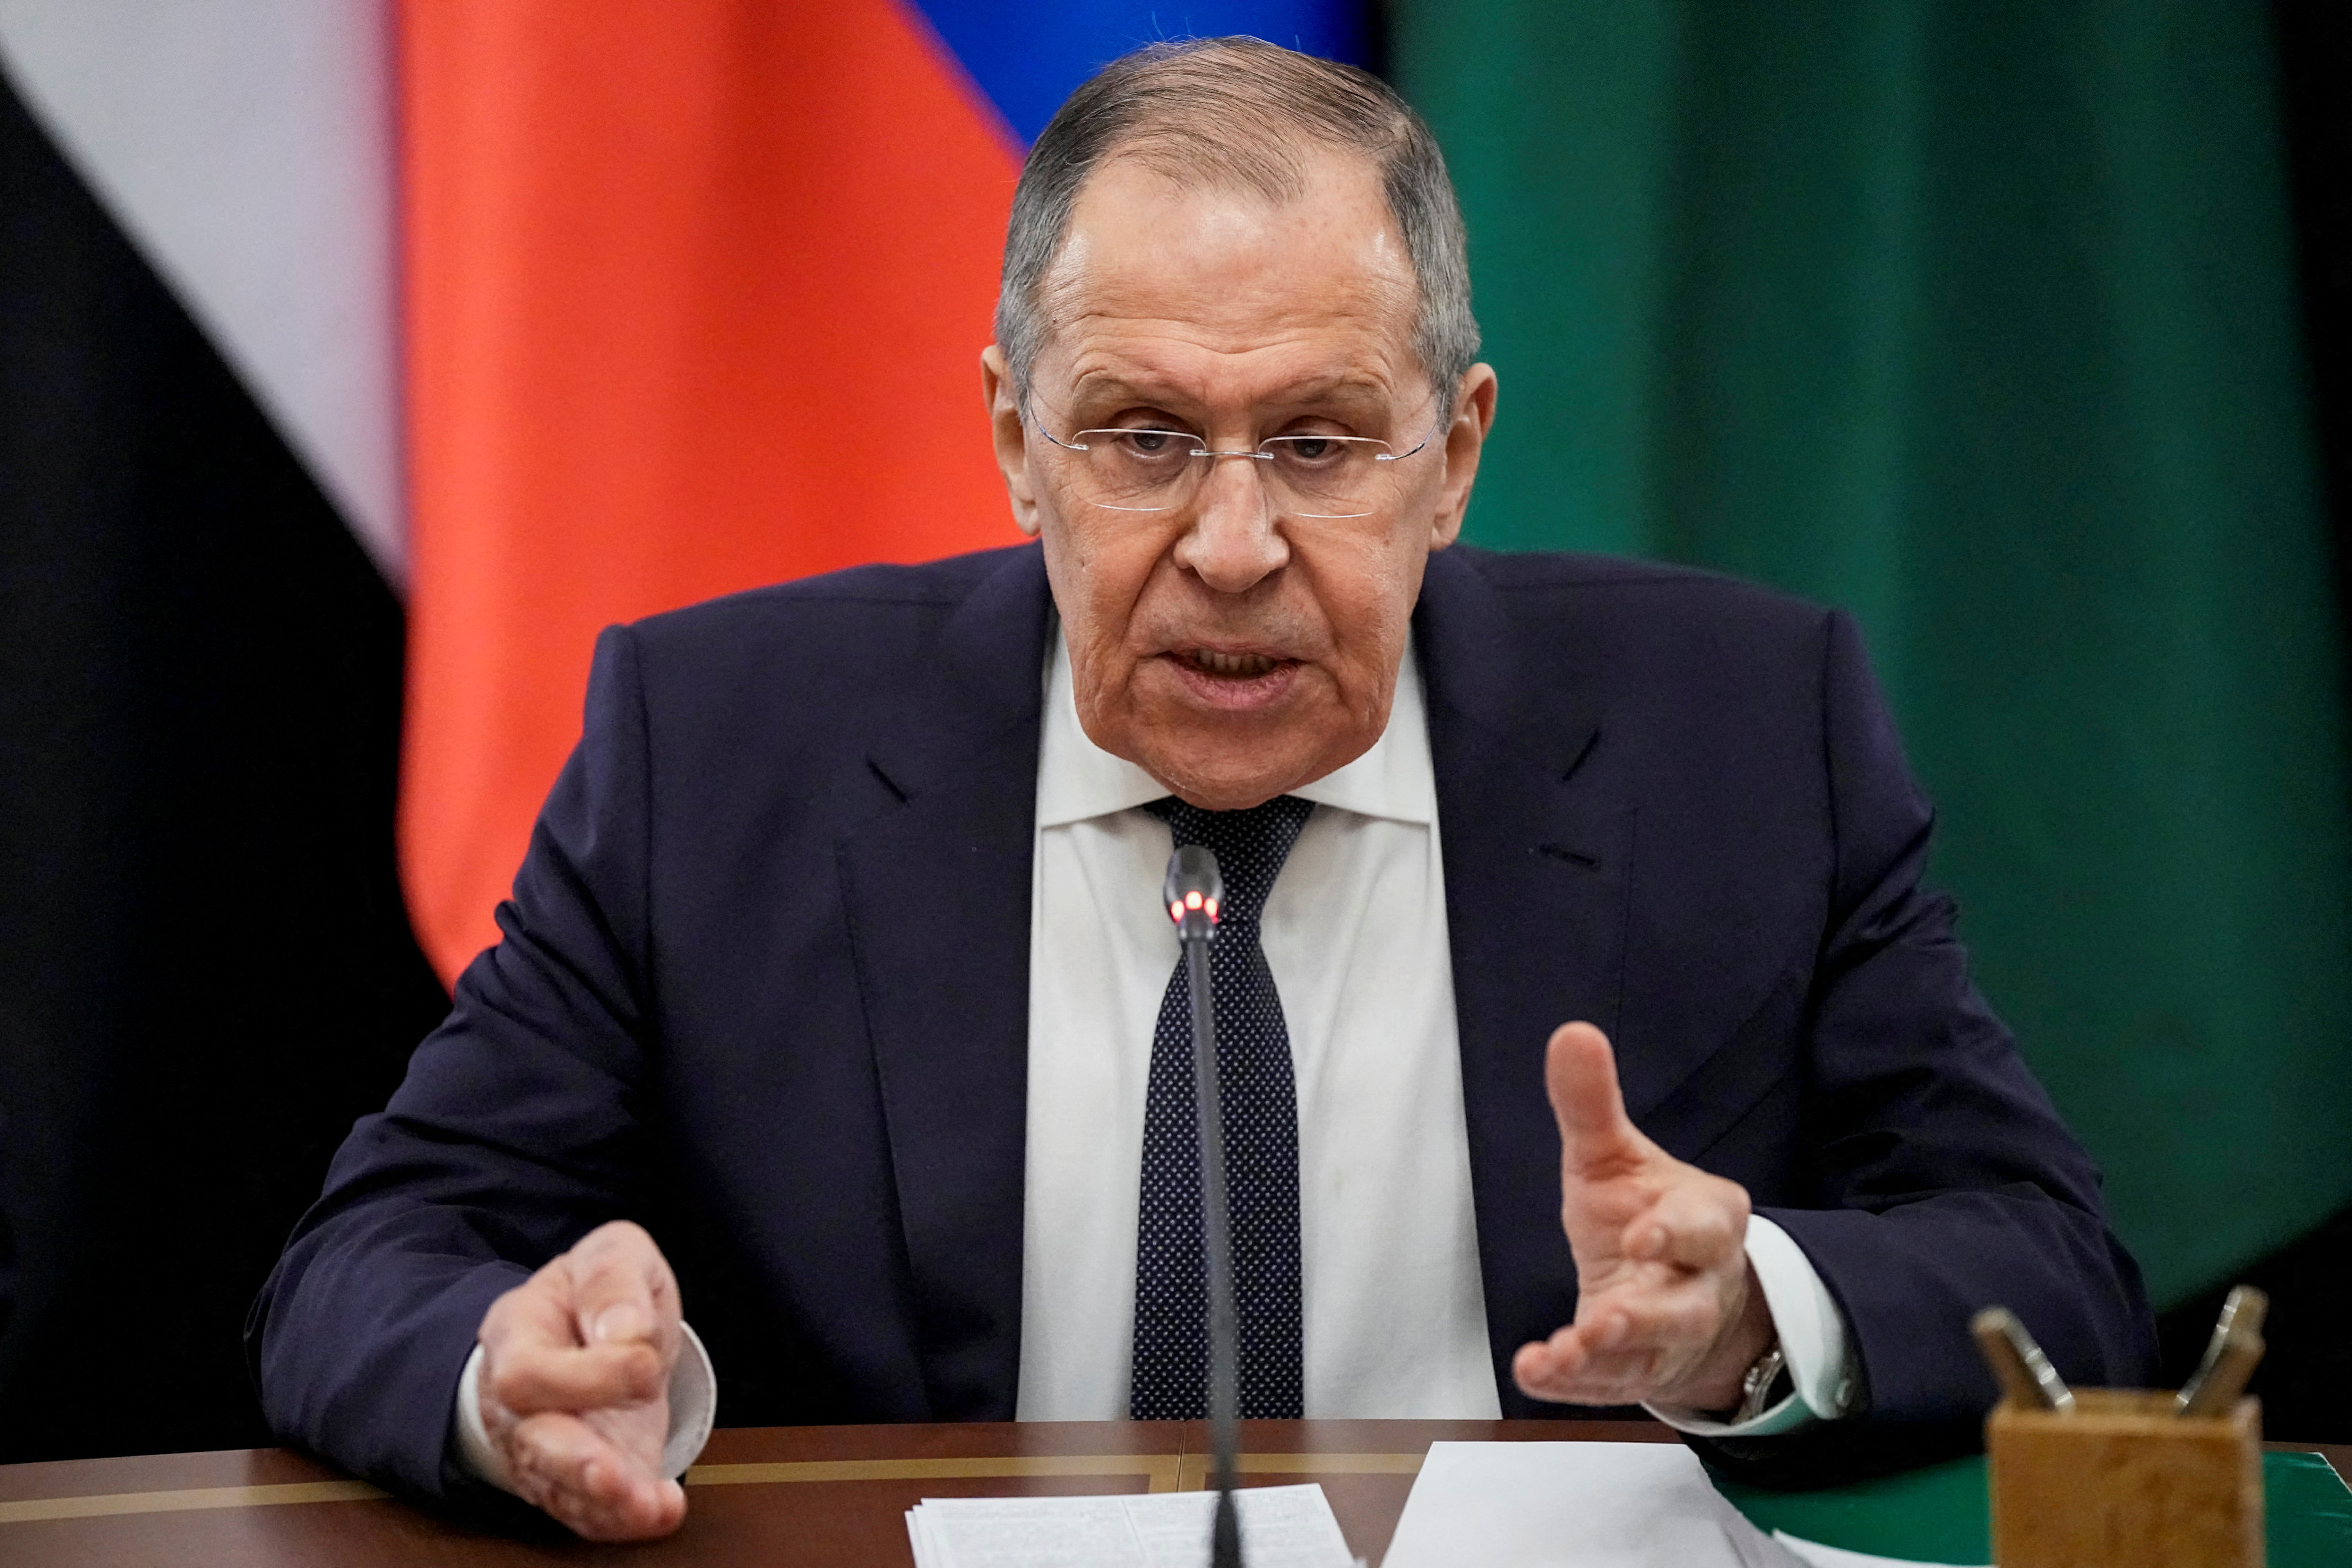 Russian Foreign Minister Sergei Lavrov speaks during his talks with representatives of the Arab League nations, in Moscow, Russia, on April 4.